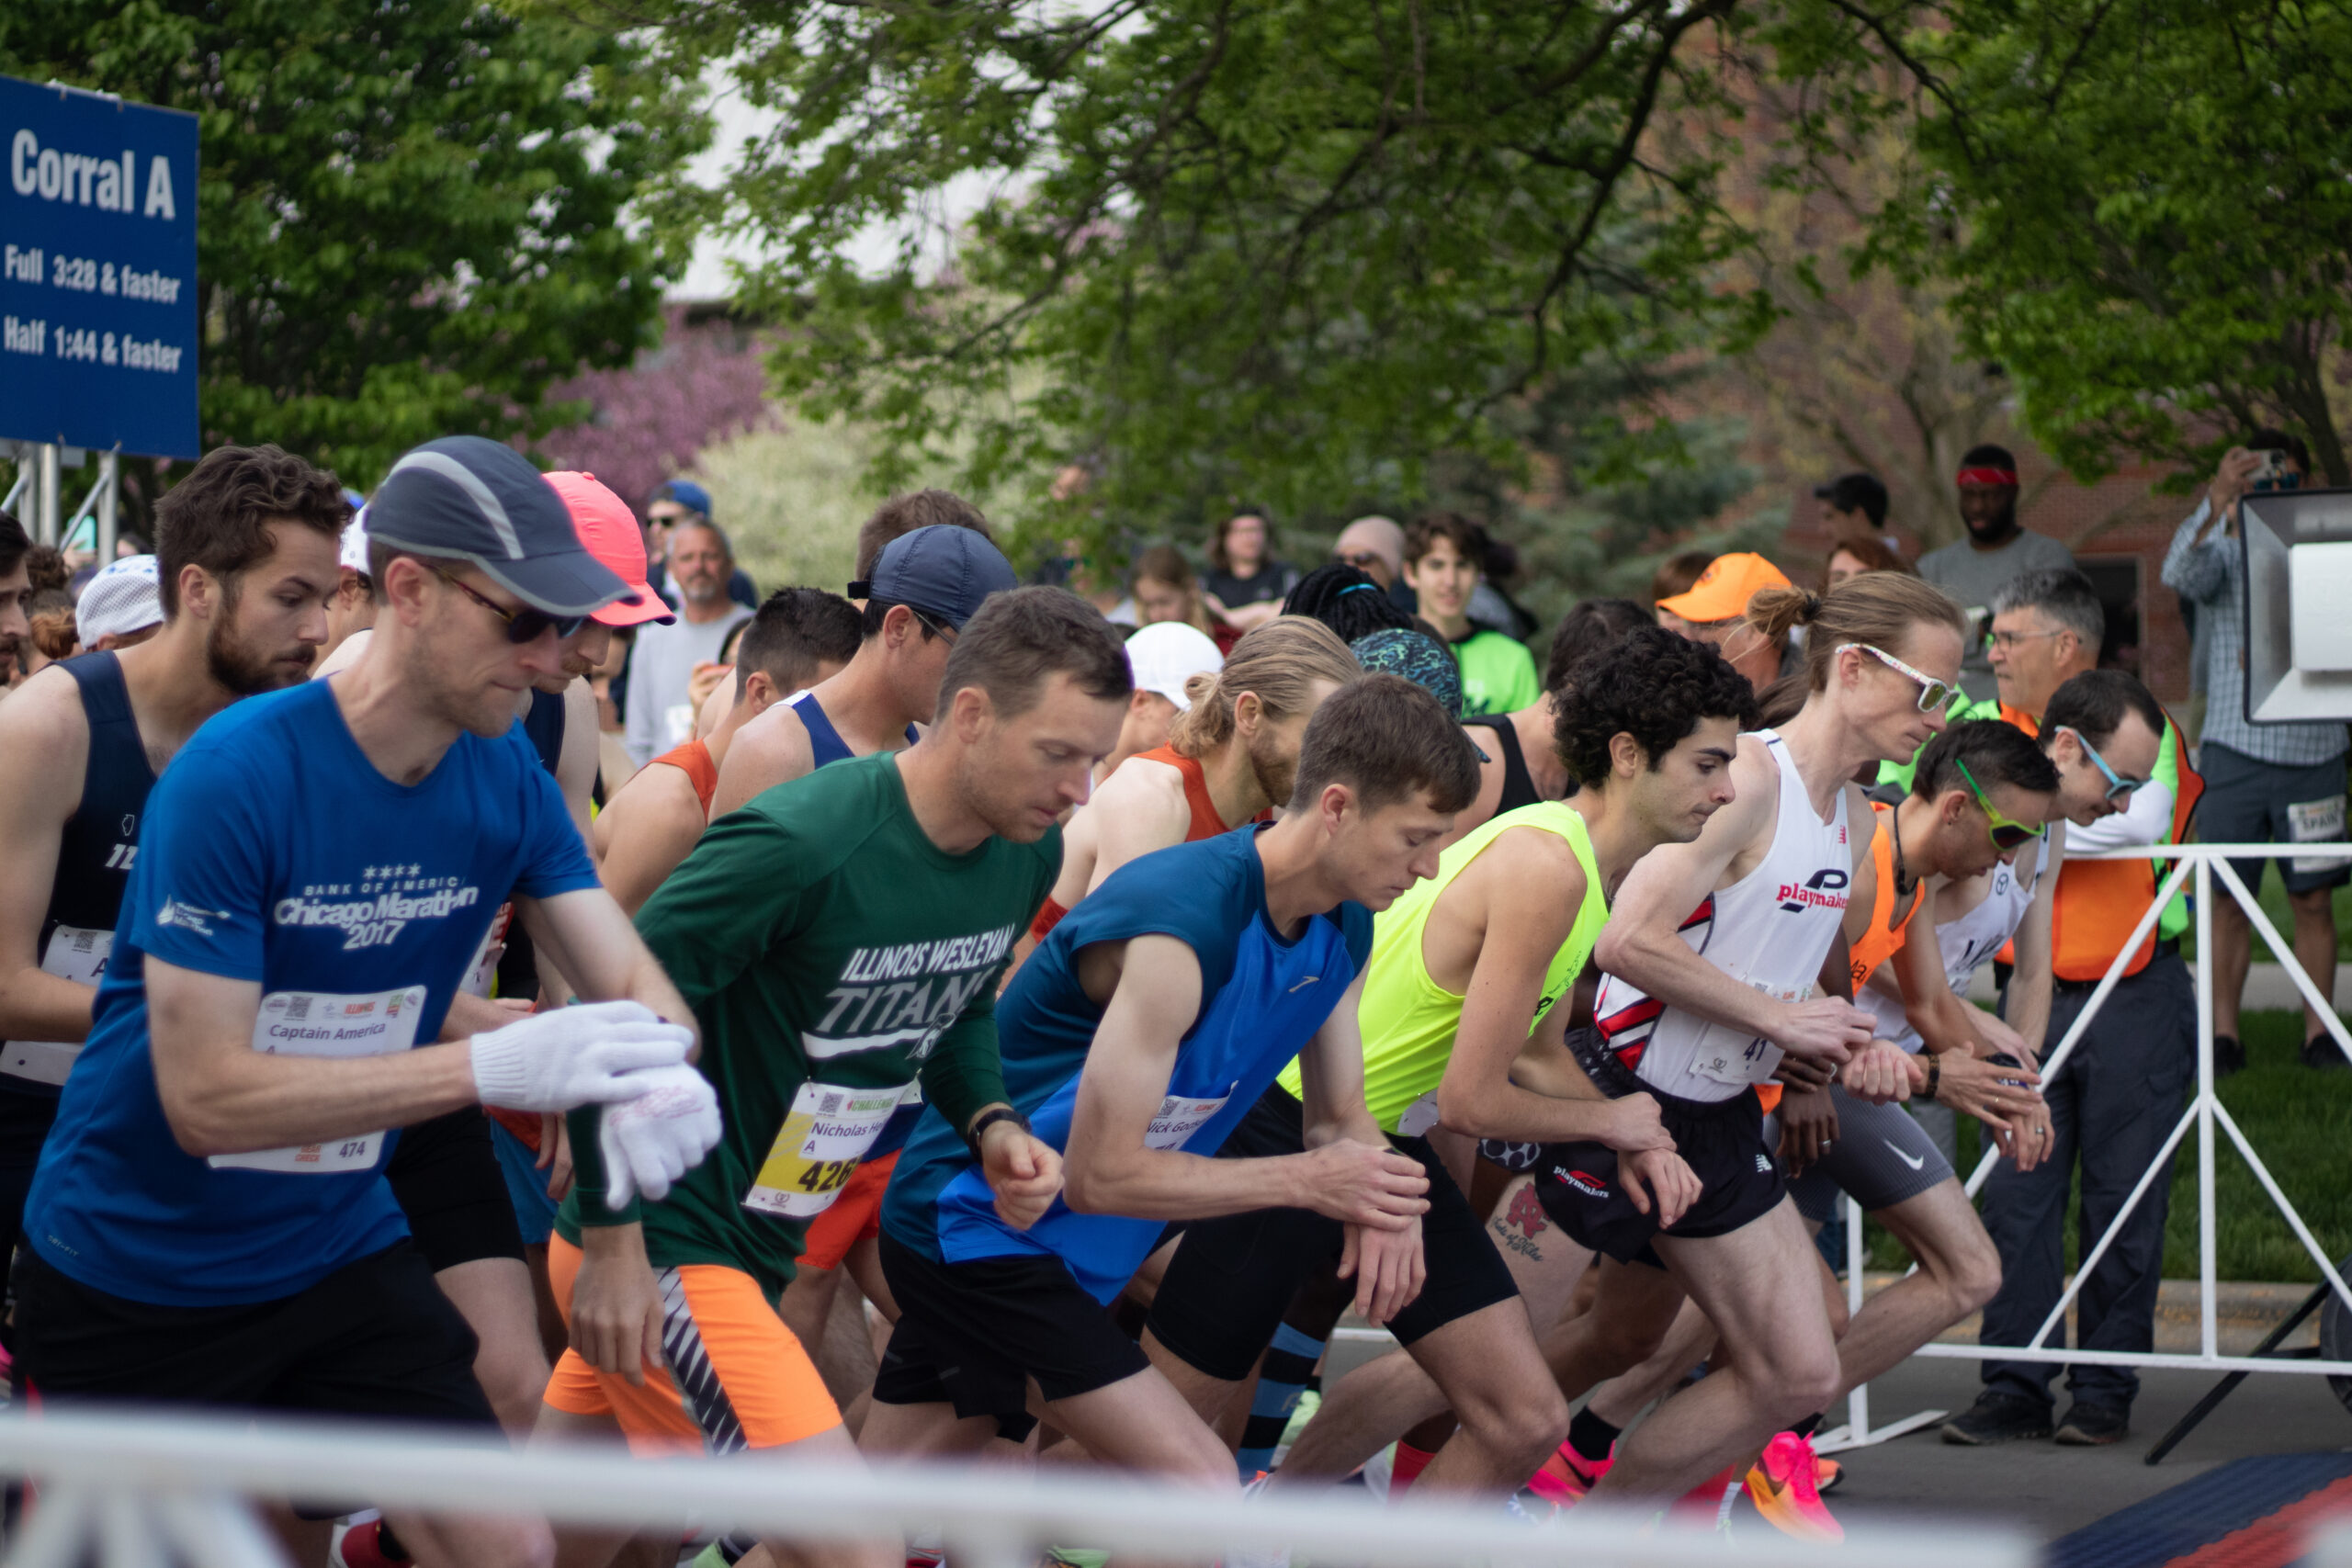 Athletes achieve physical and emotional feats at Christie Clinic Race